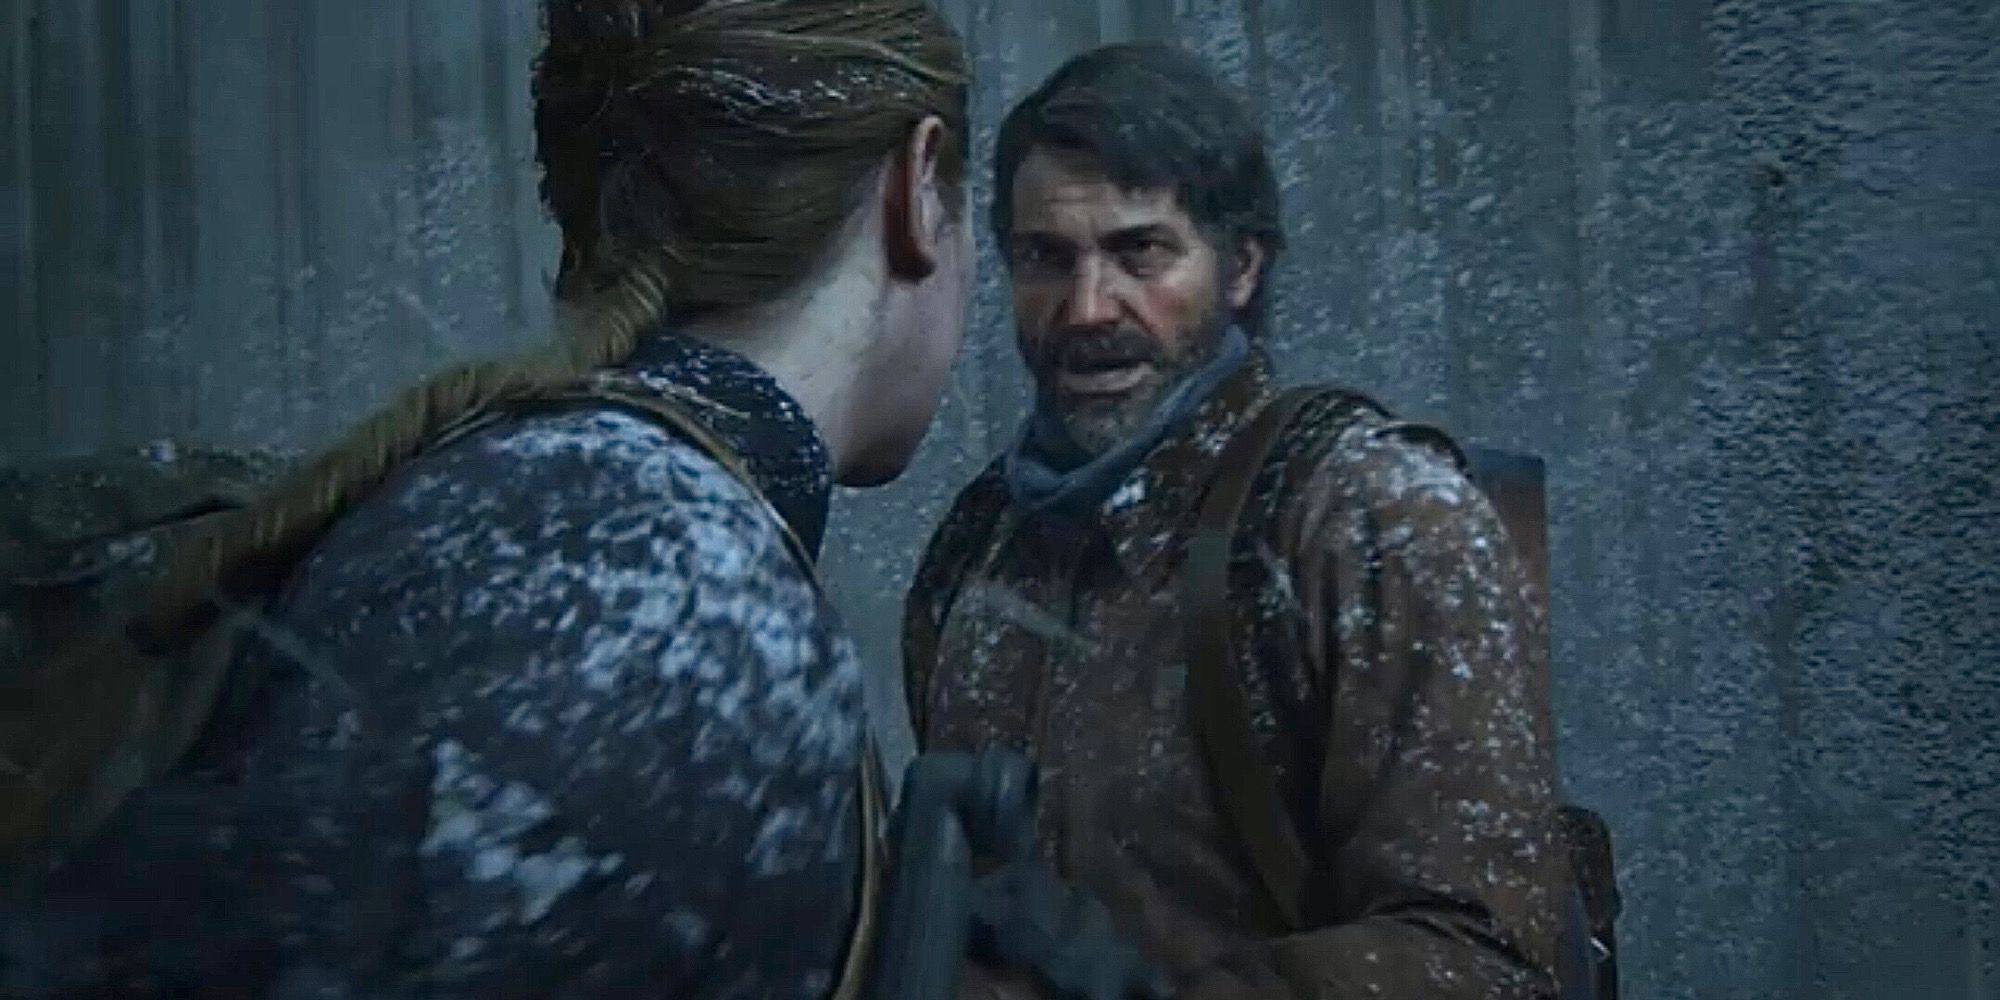 Why did Abby kill Joel in the 'Last of Us Part 2'? - Quora